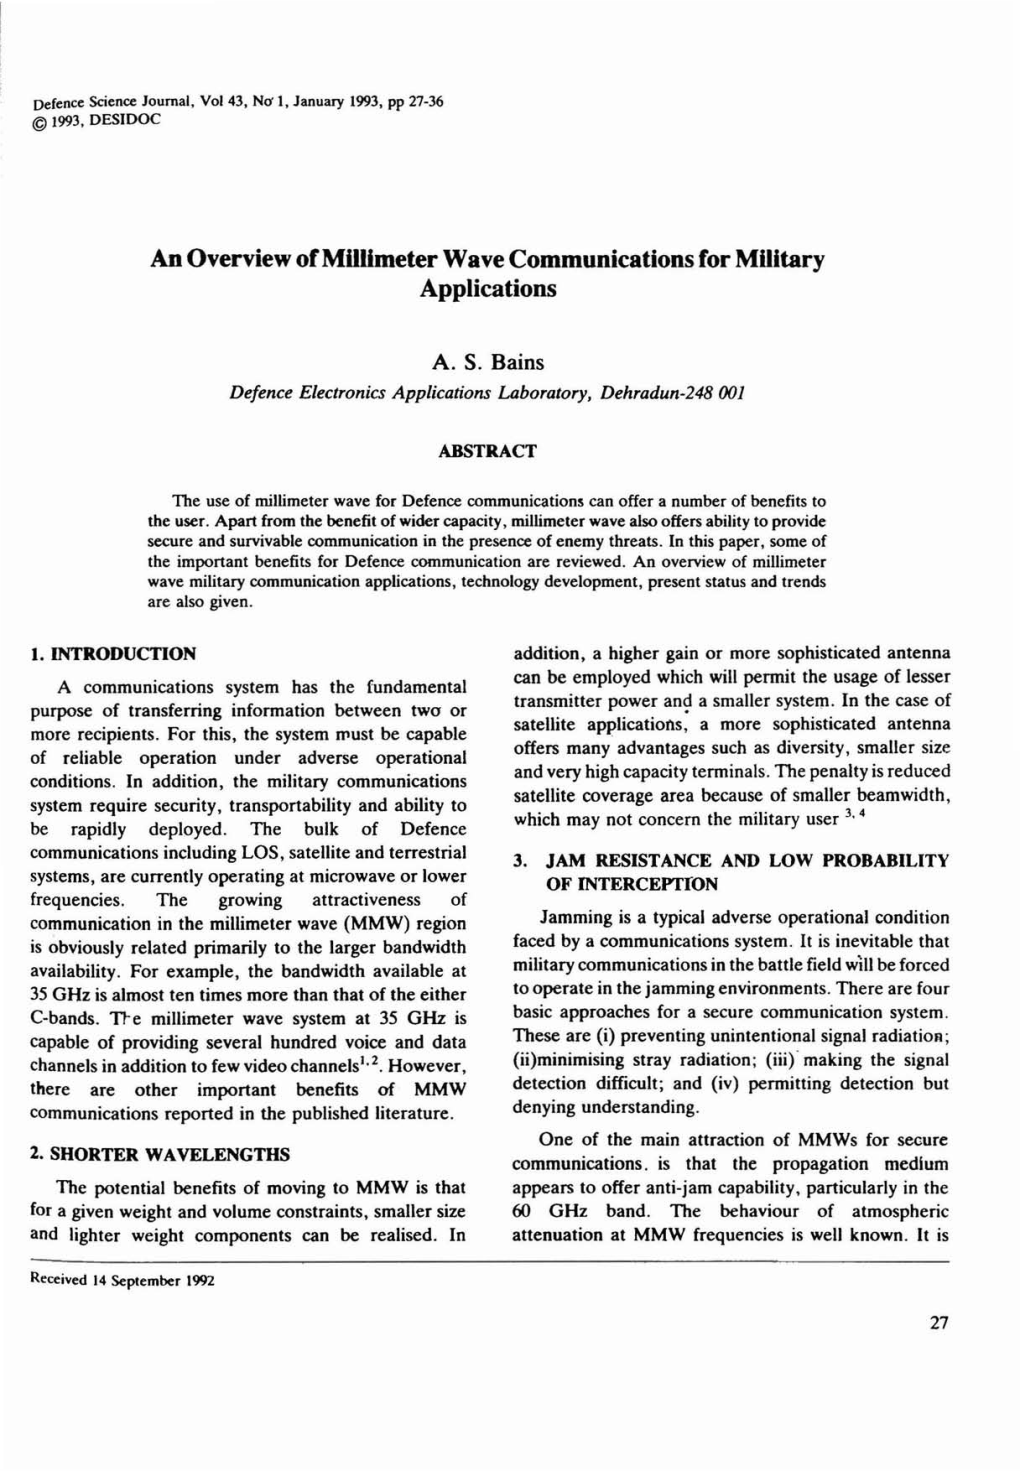 An Overview Ofmulimeter Wave Communications for Military Applications